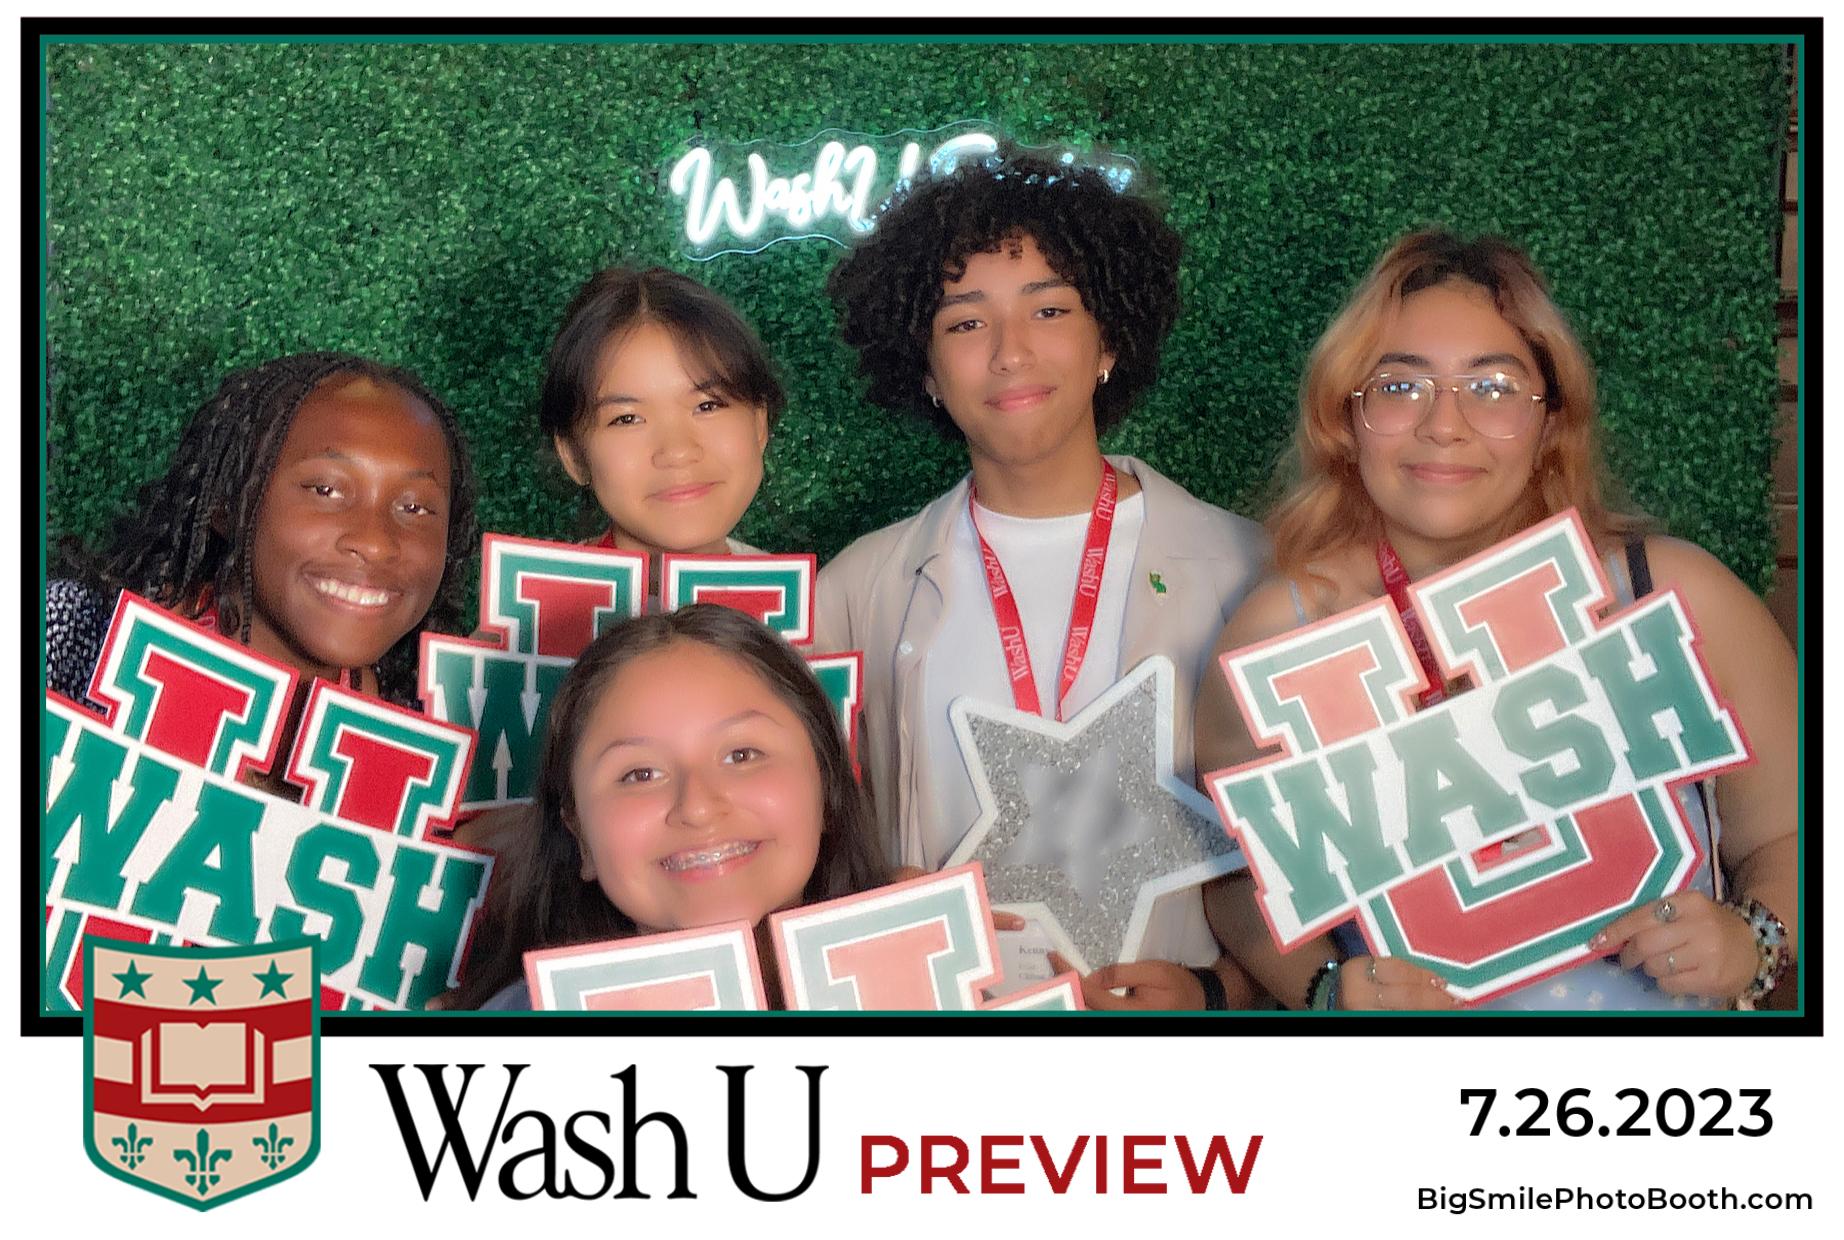 Harumi posed with classmates at a WashU event. They are all smiling and holding a sign that says "WashU".